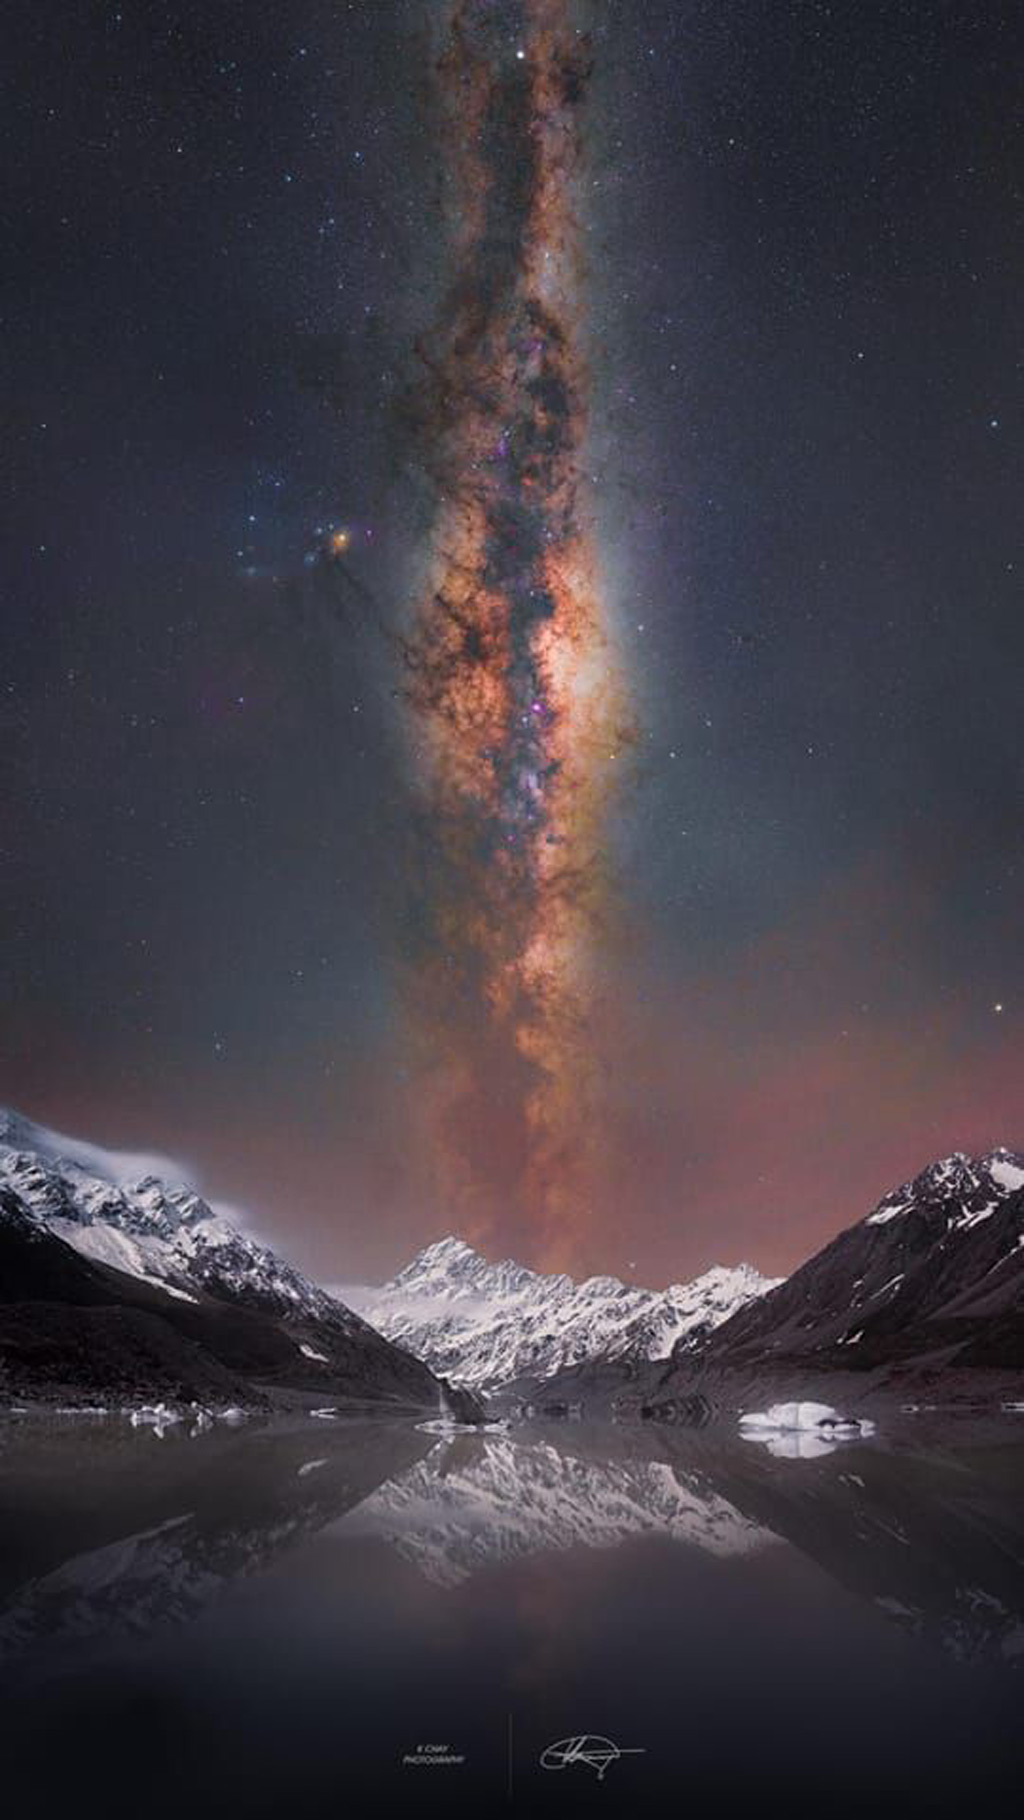 A detailed view of the Milky Way rises above an icy lake and snow capped mountains.